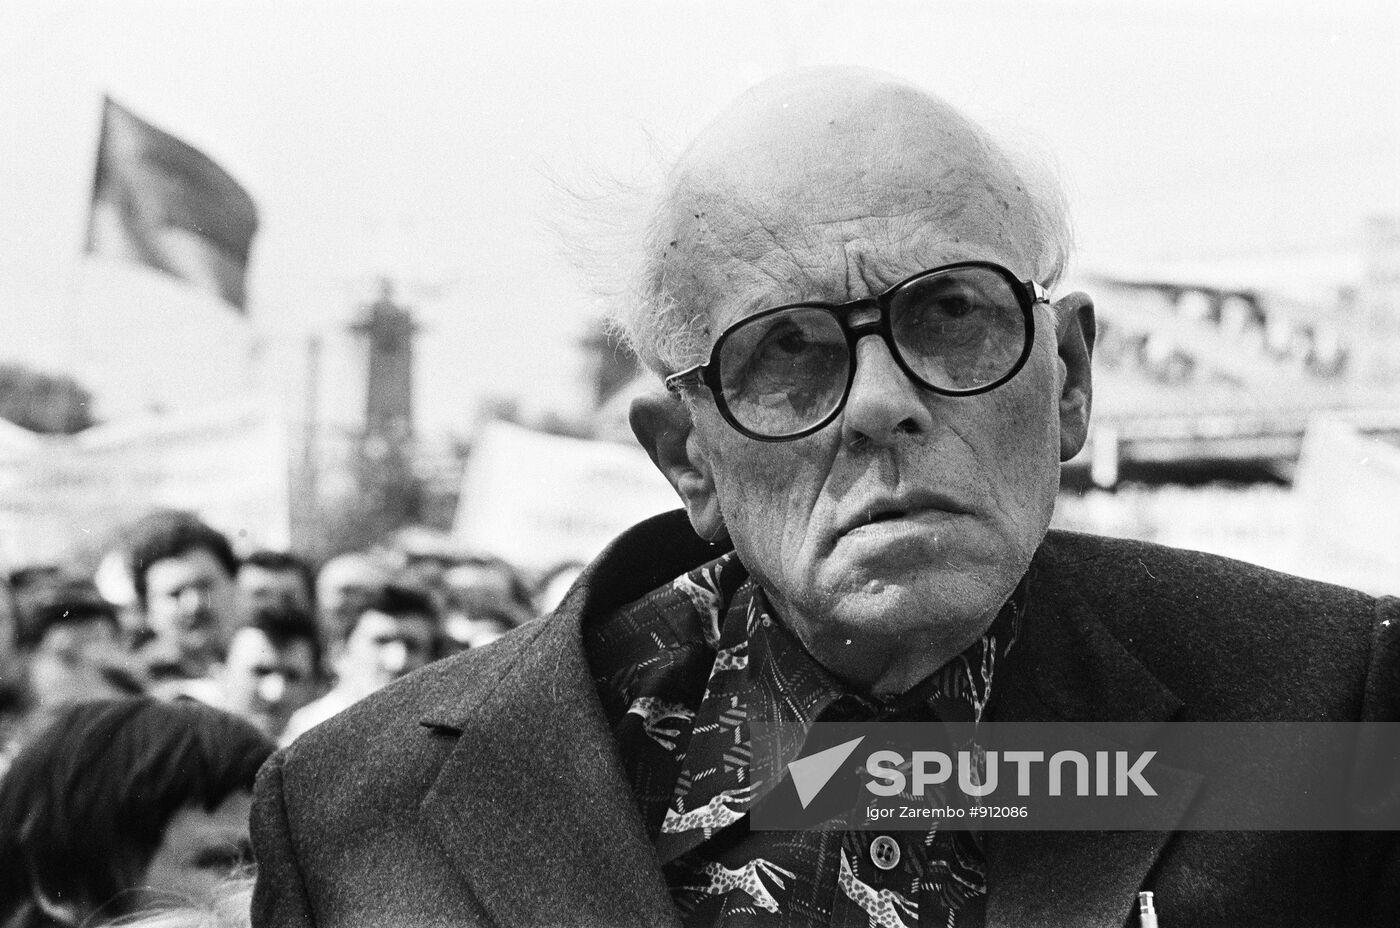 Archive photos of Academician Andrei Sakharov